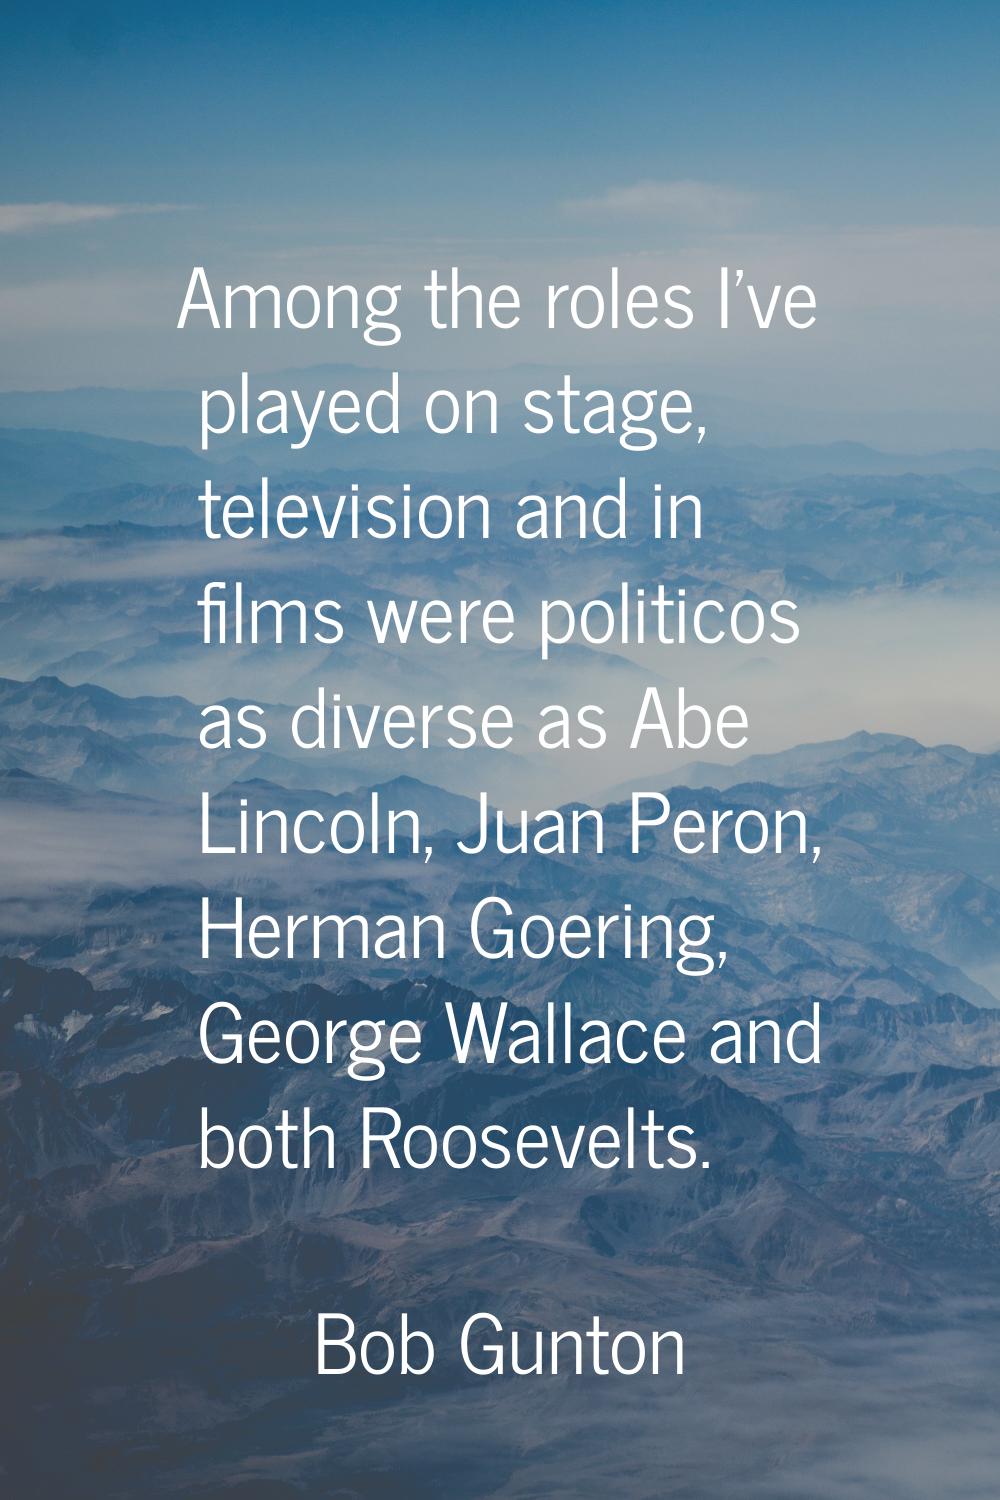 Among the roles I've played on stage, television and in films were politicos as diverse as Abe Linc